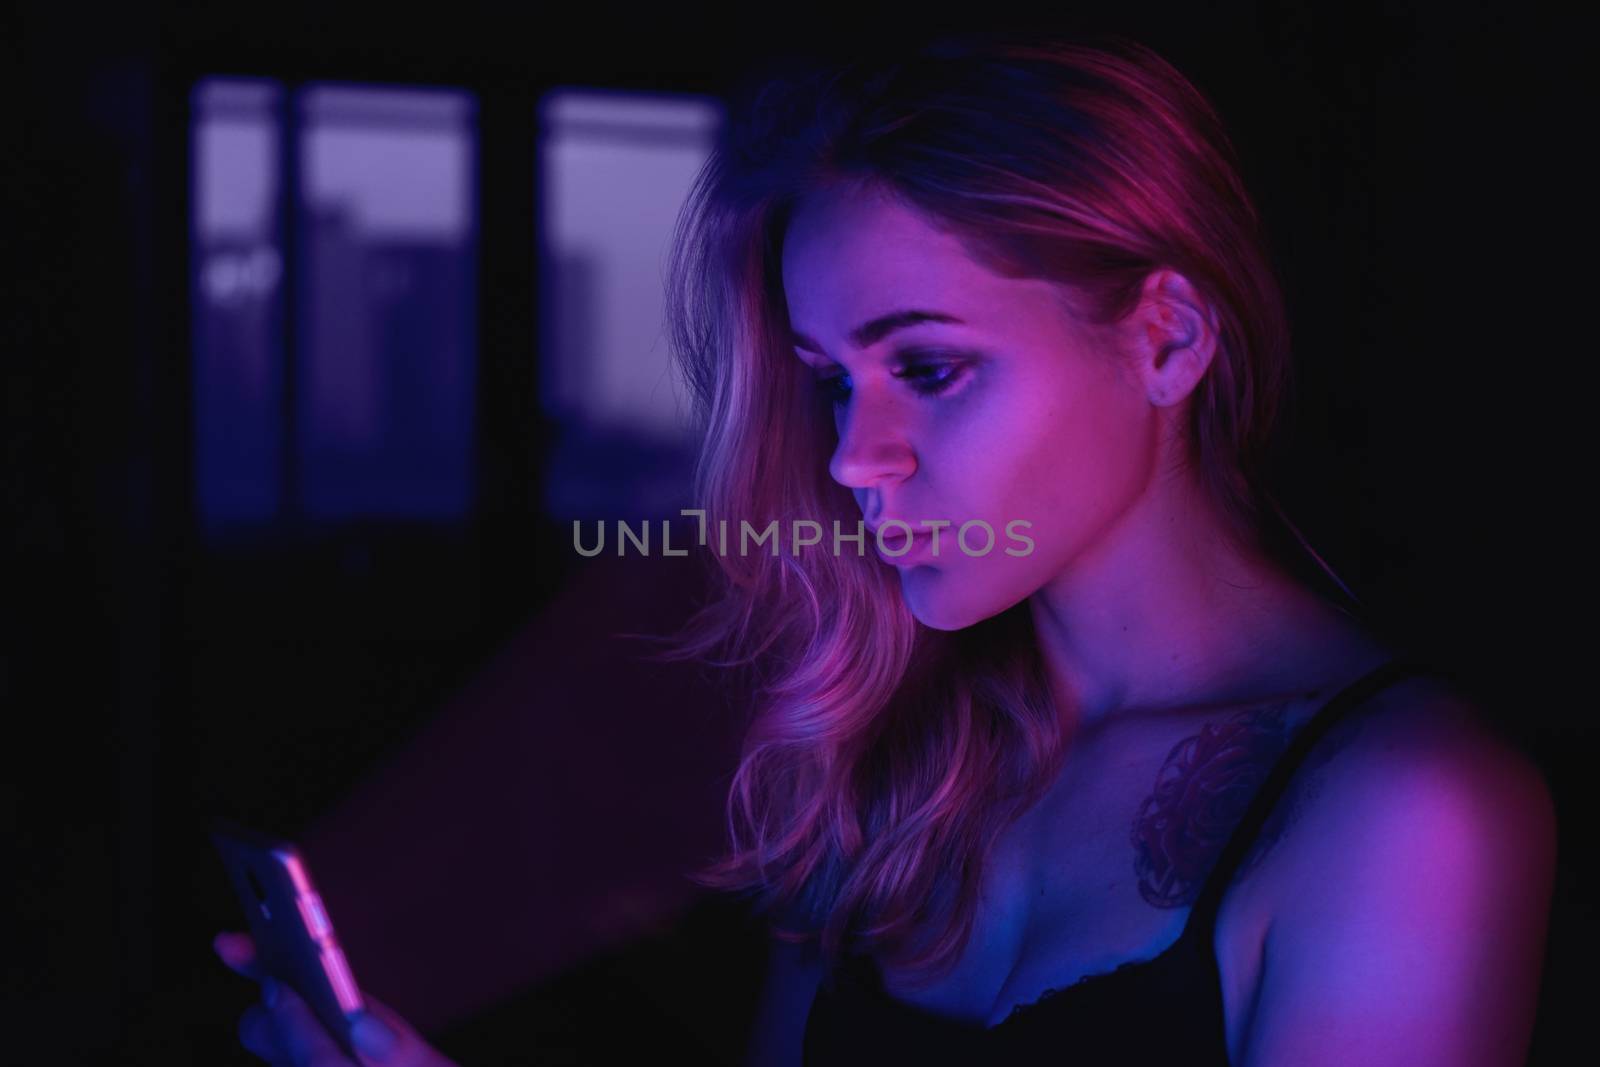 Girl using cellphone at night with neon light - pink and blue